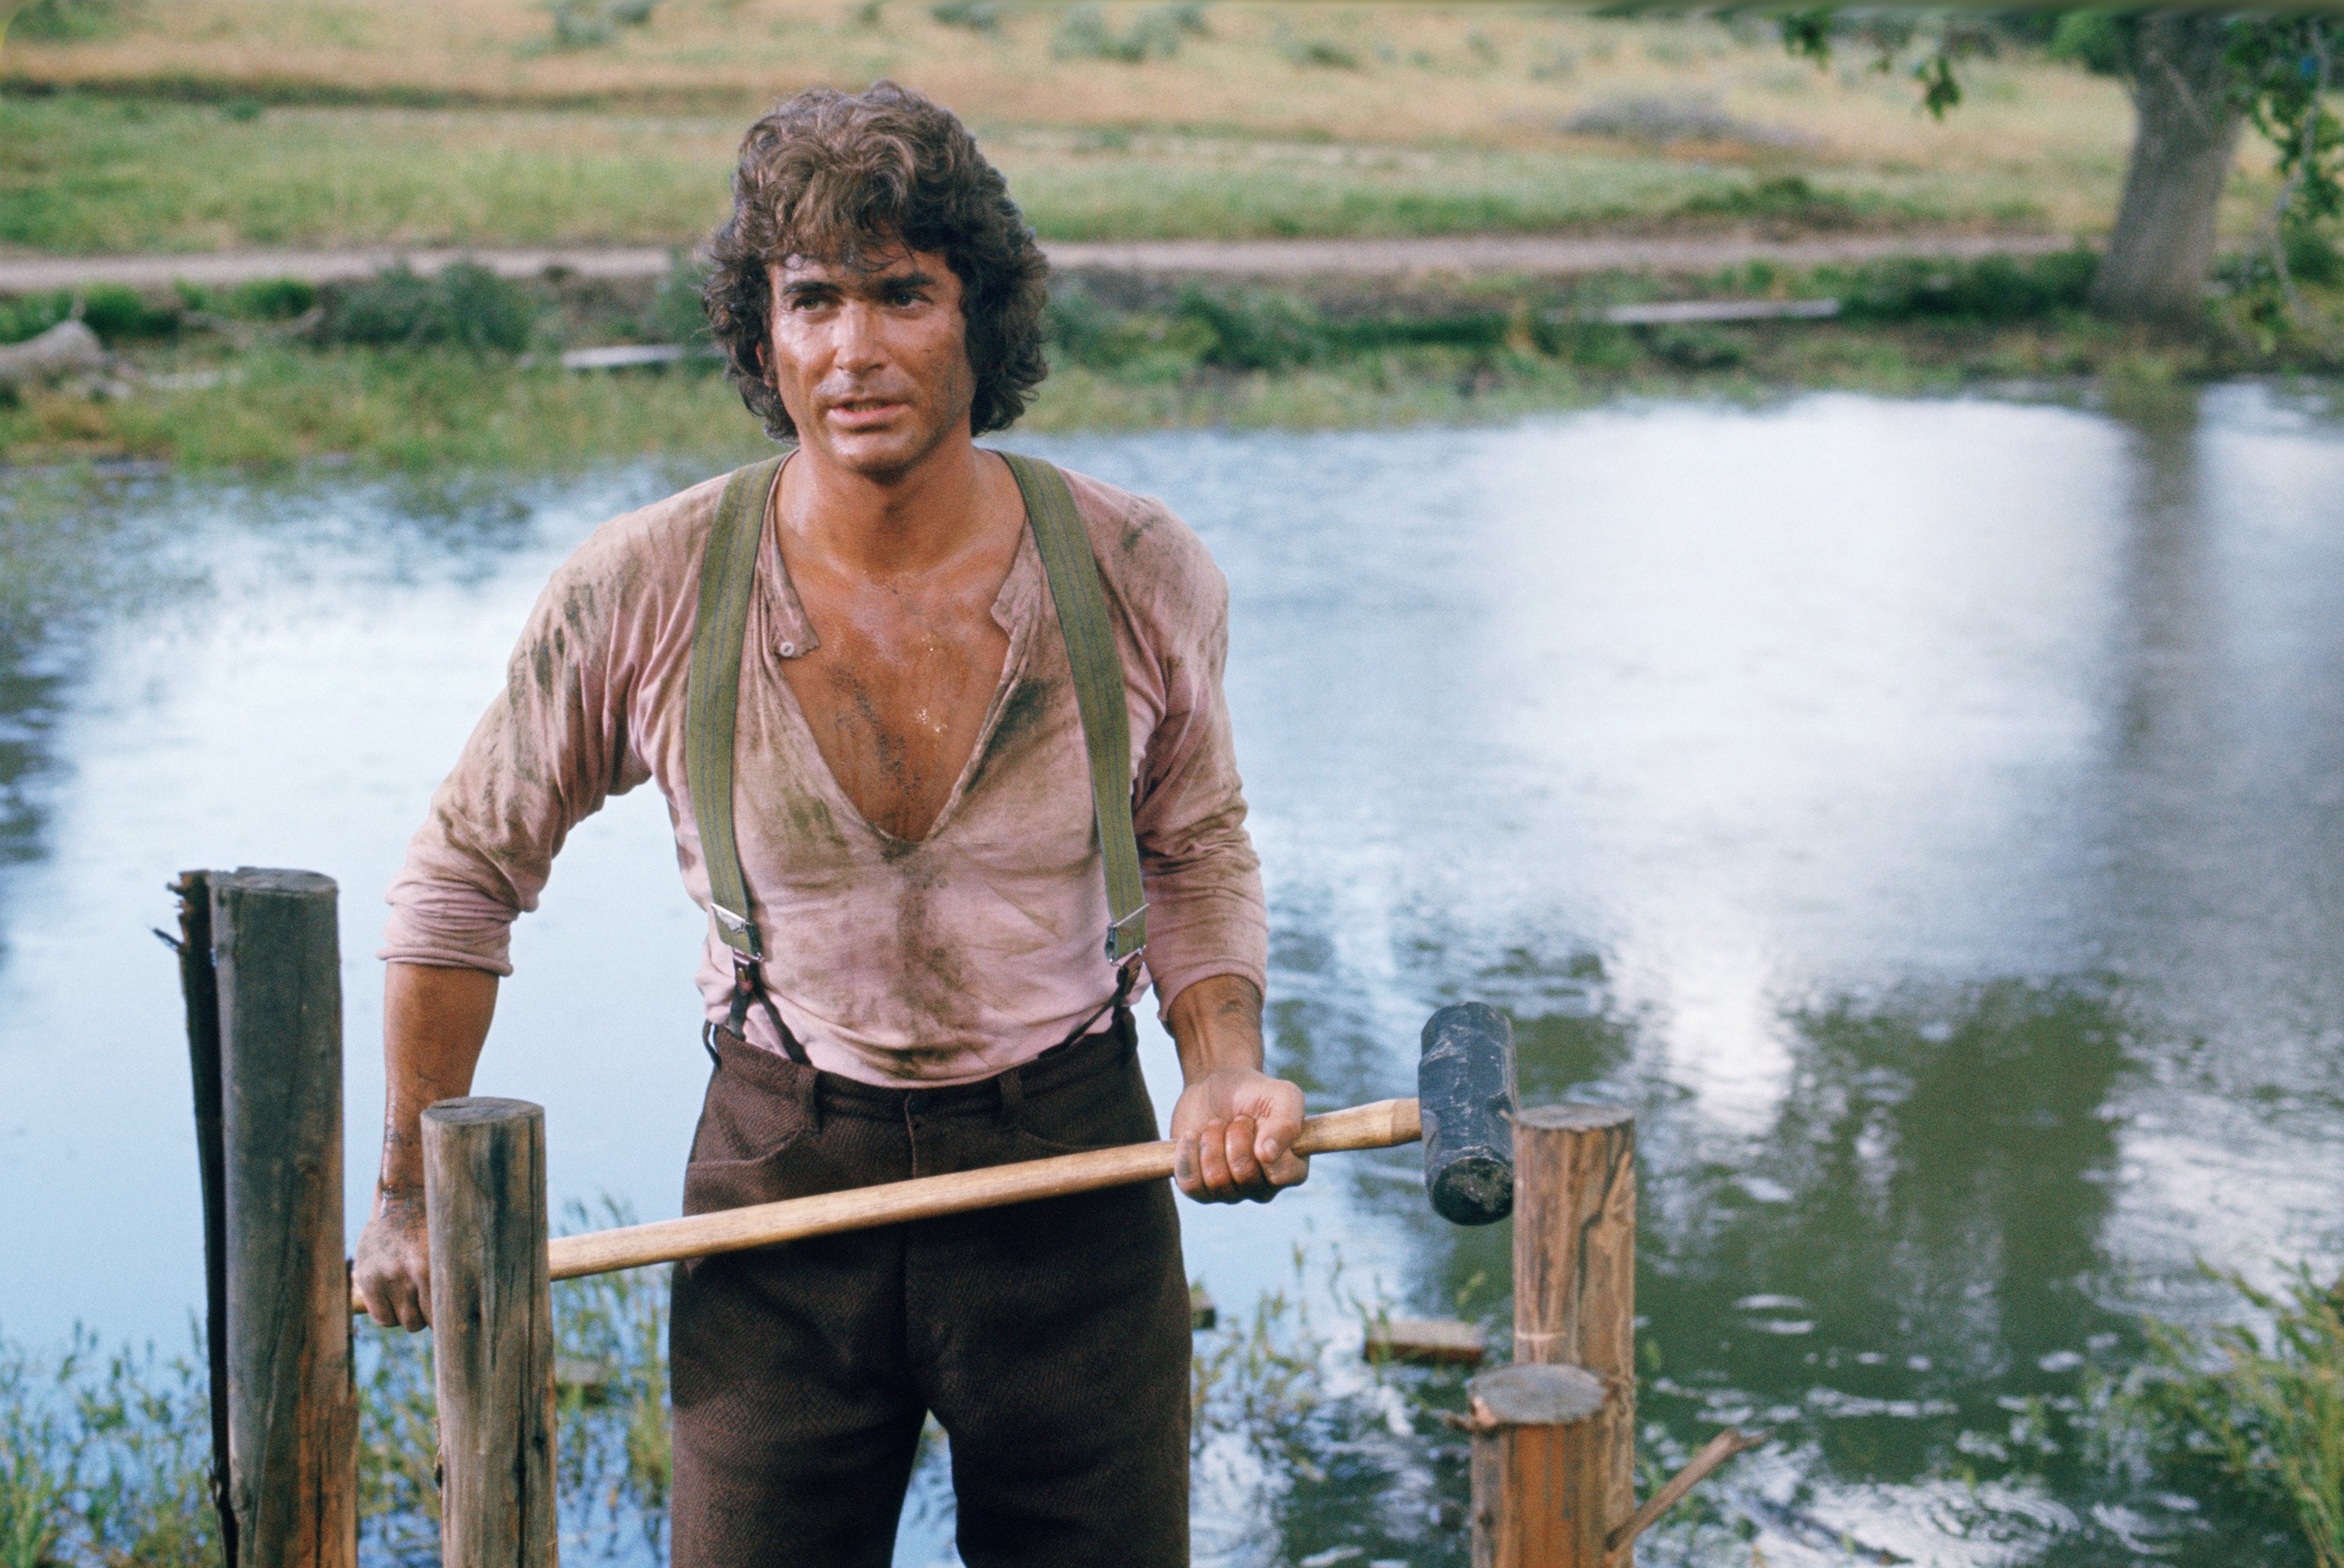 Michael Landon as Charles Ingalls on Little House on the Prairie